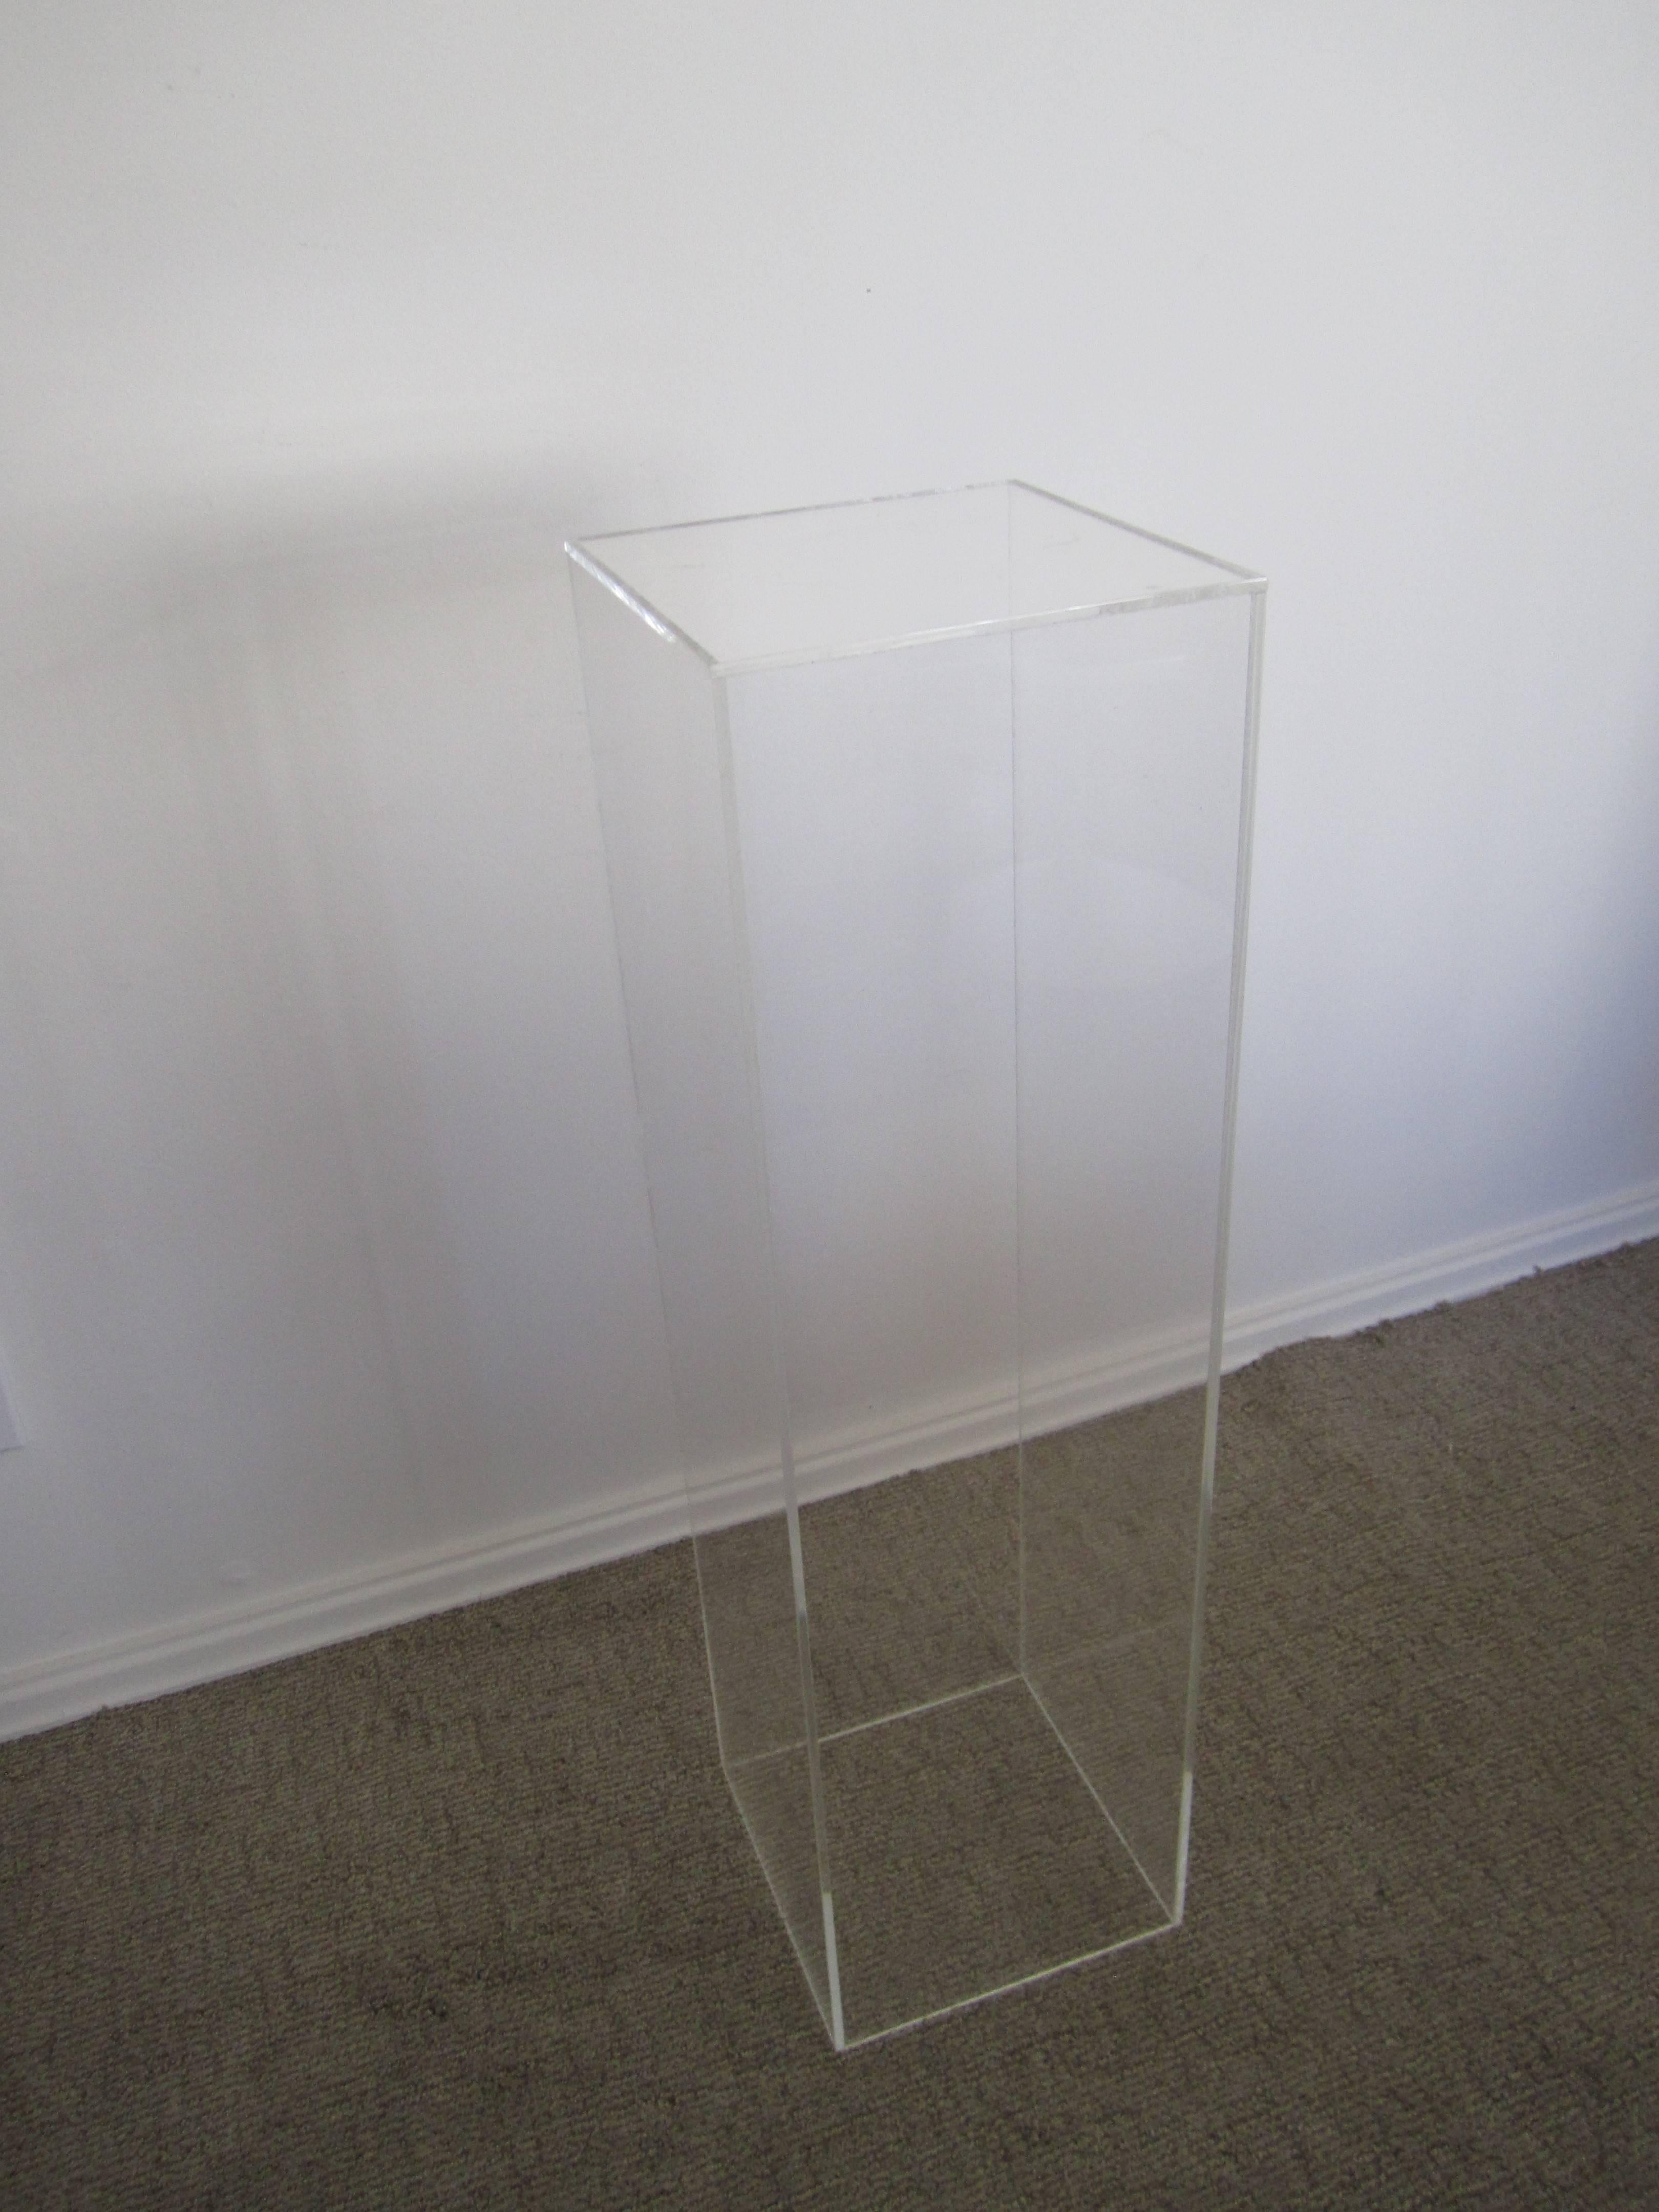 A 3' tall rectangular acrylic pedestal stand display piece for items such as art, sculpture, jewelry and more. Measurements include: 10